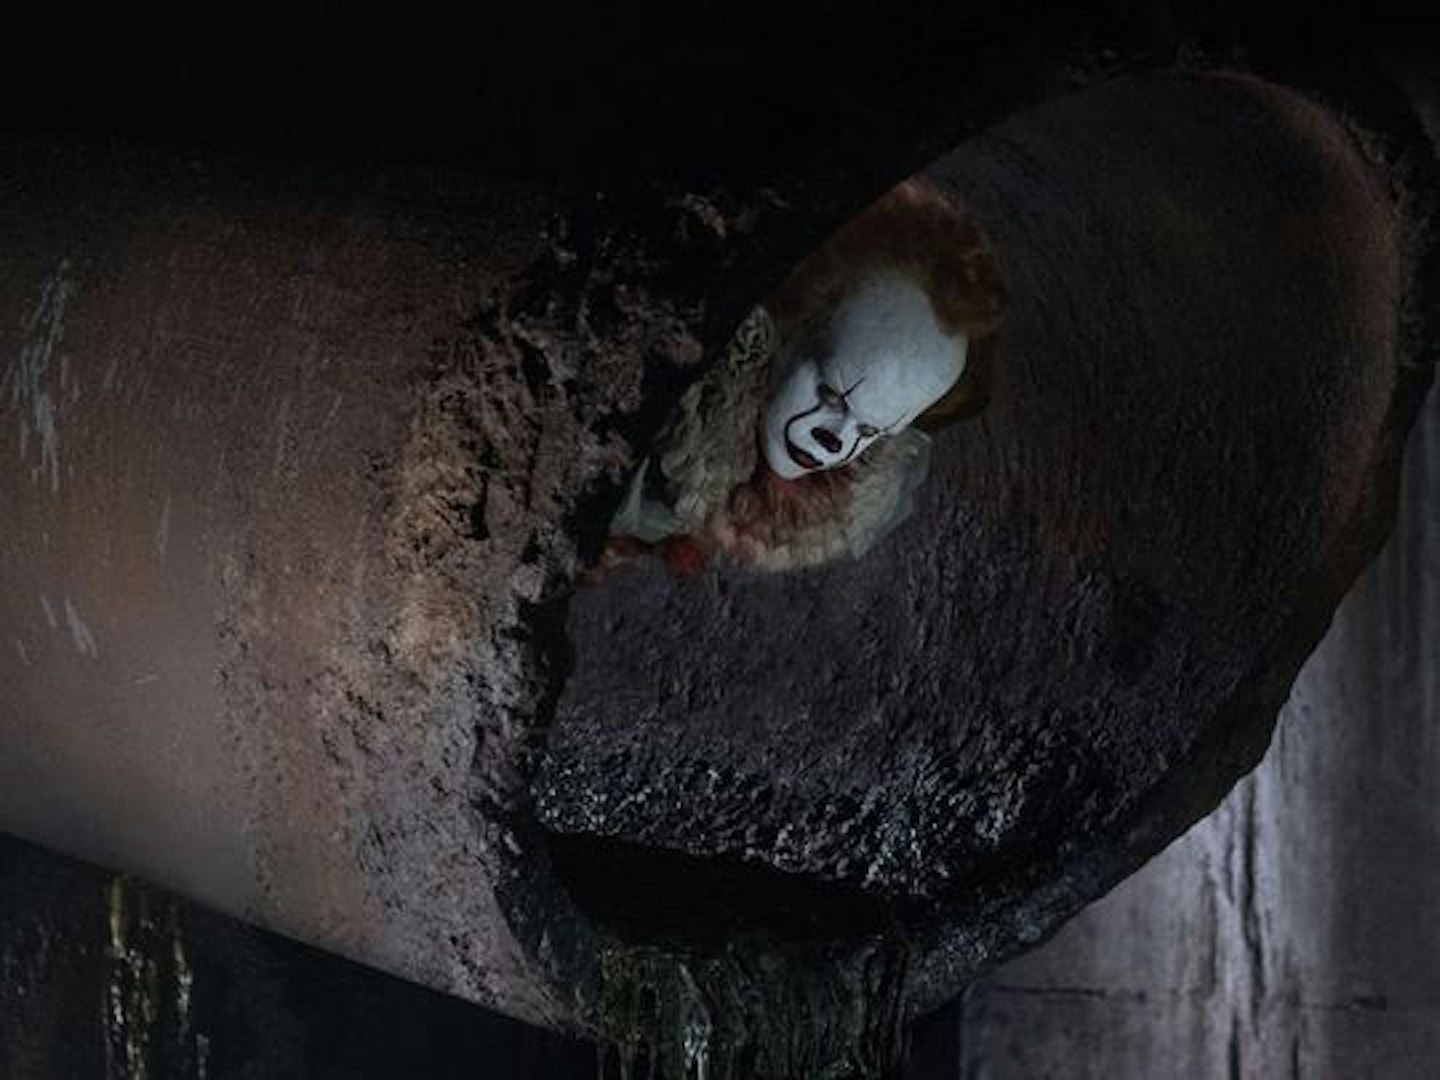 New It images